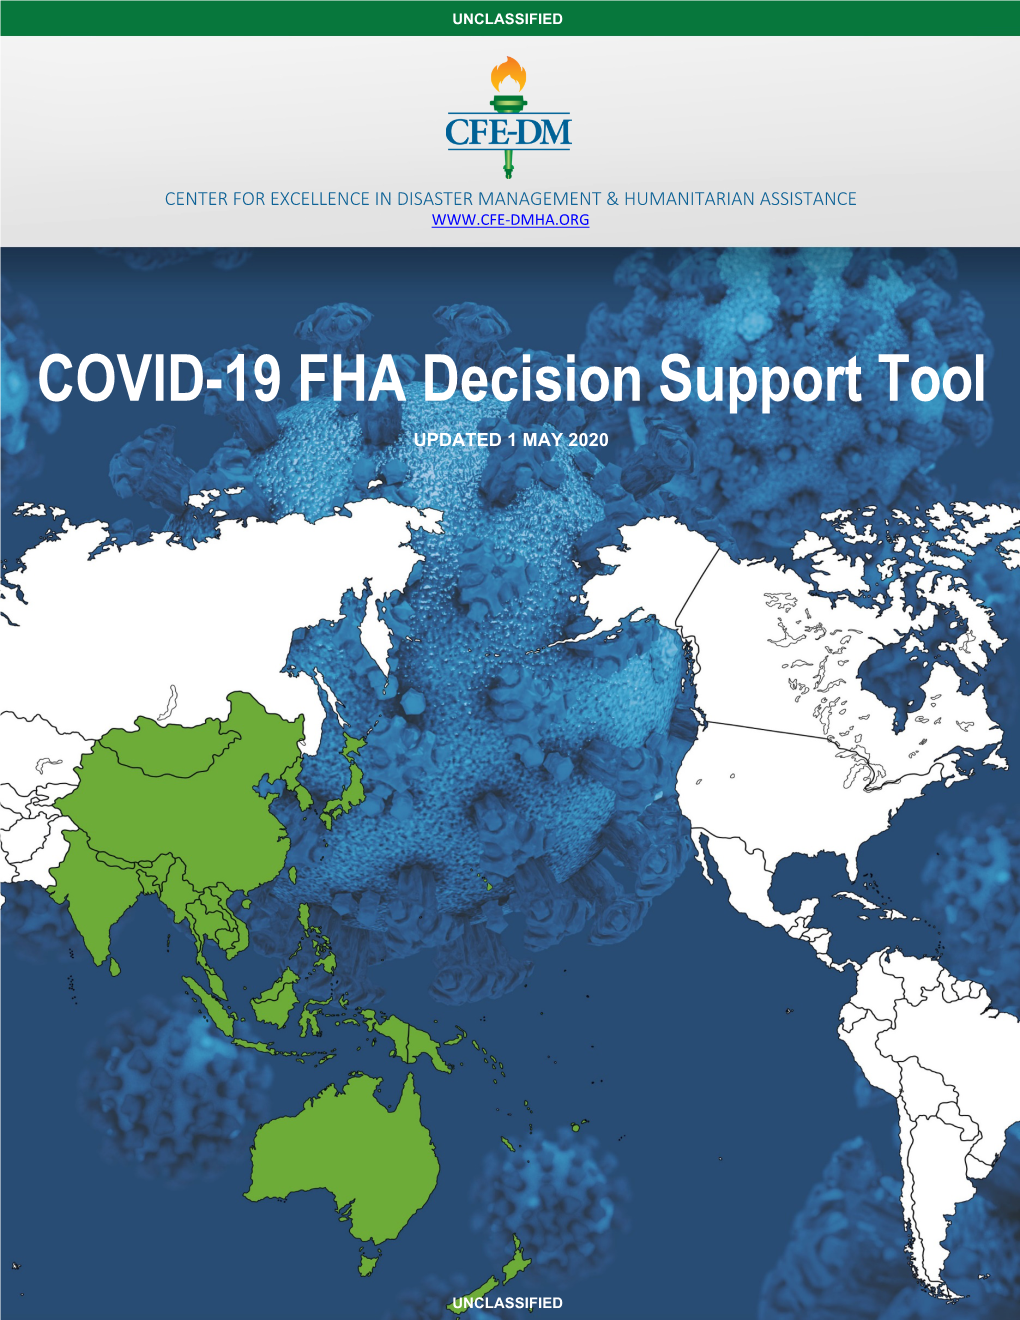 COVID-19 FHA Decision Support Tool UPDATED 1 MAY 2020